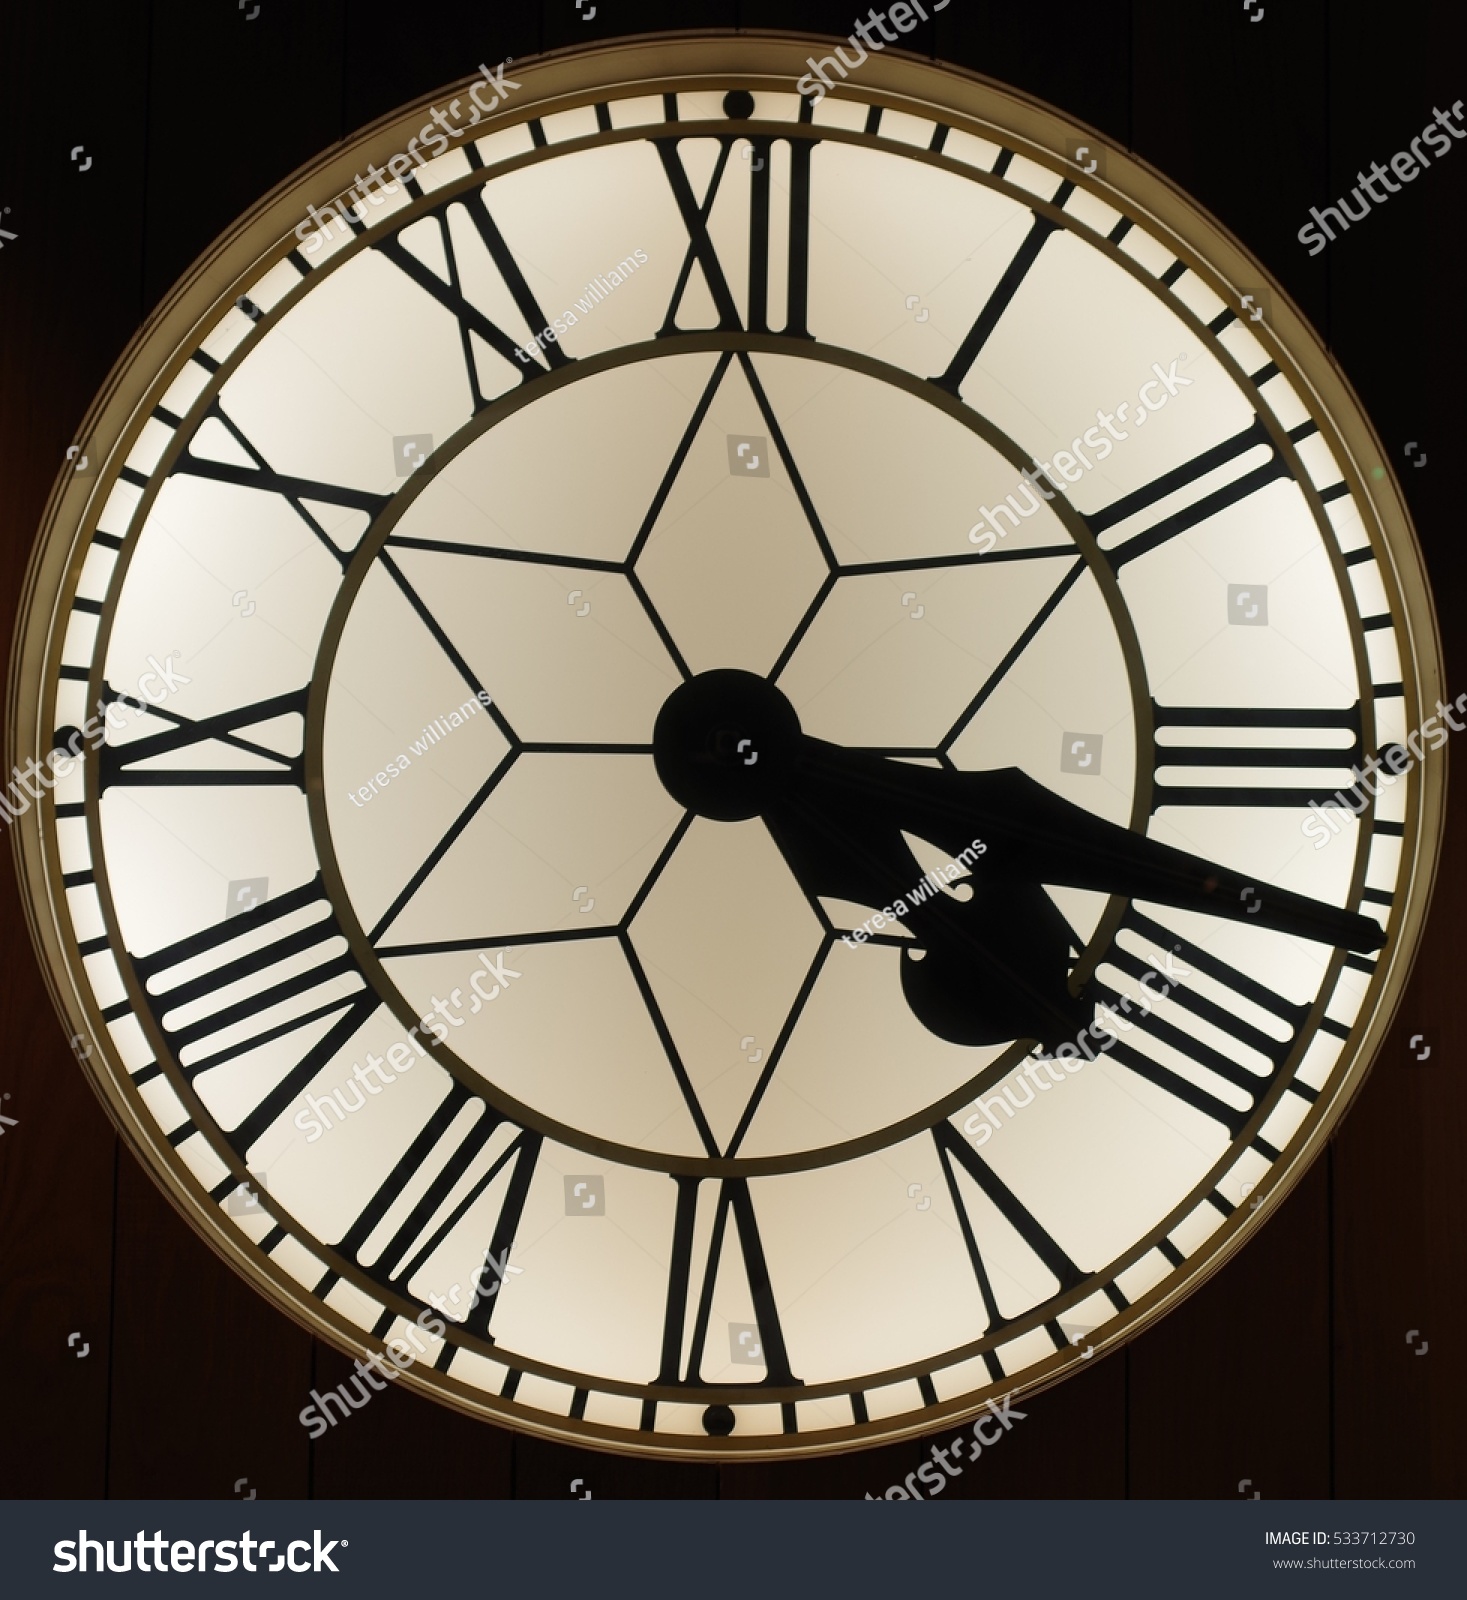 A close up of a circular clock with roman numerals. The time is twenty past four. It has a black background.  The inside of the clock has a star shape. #533712730